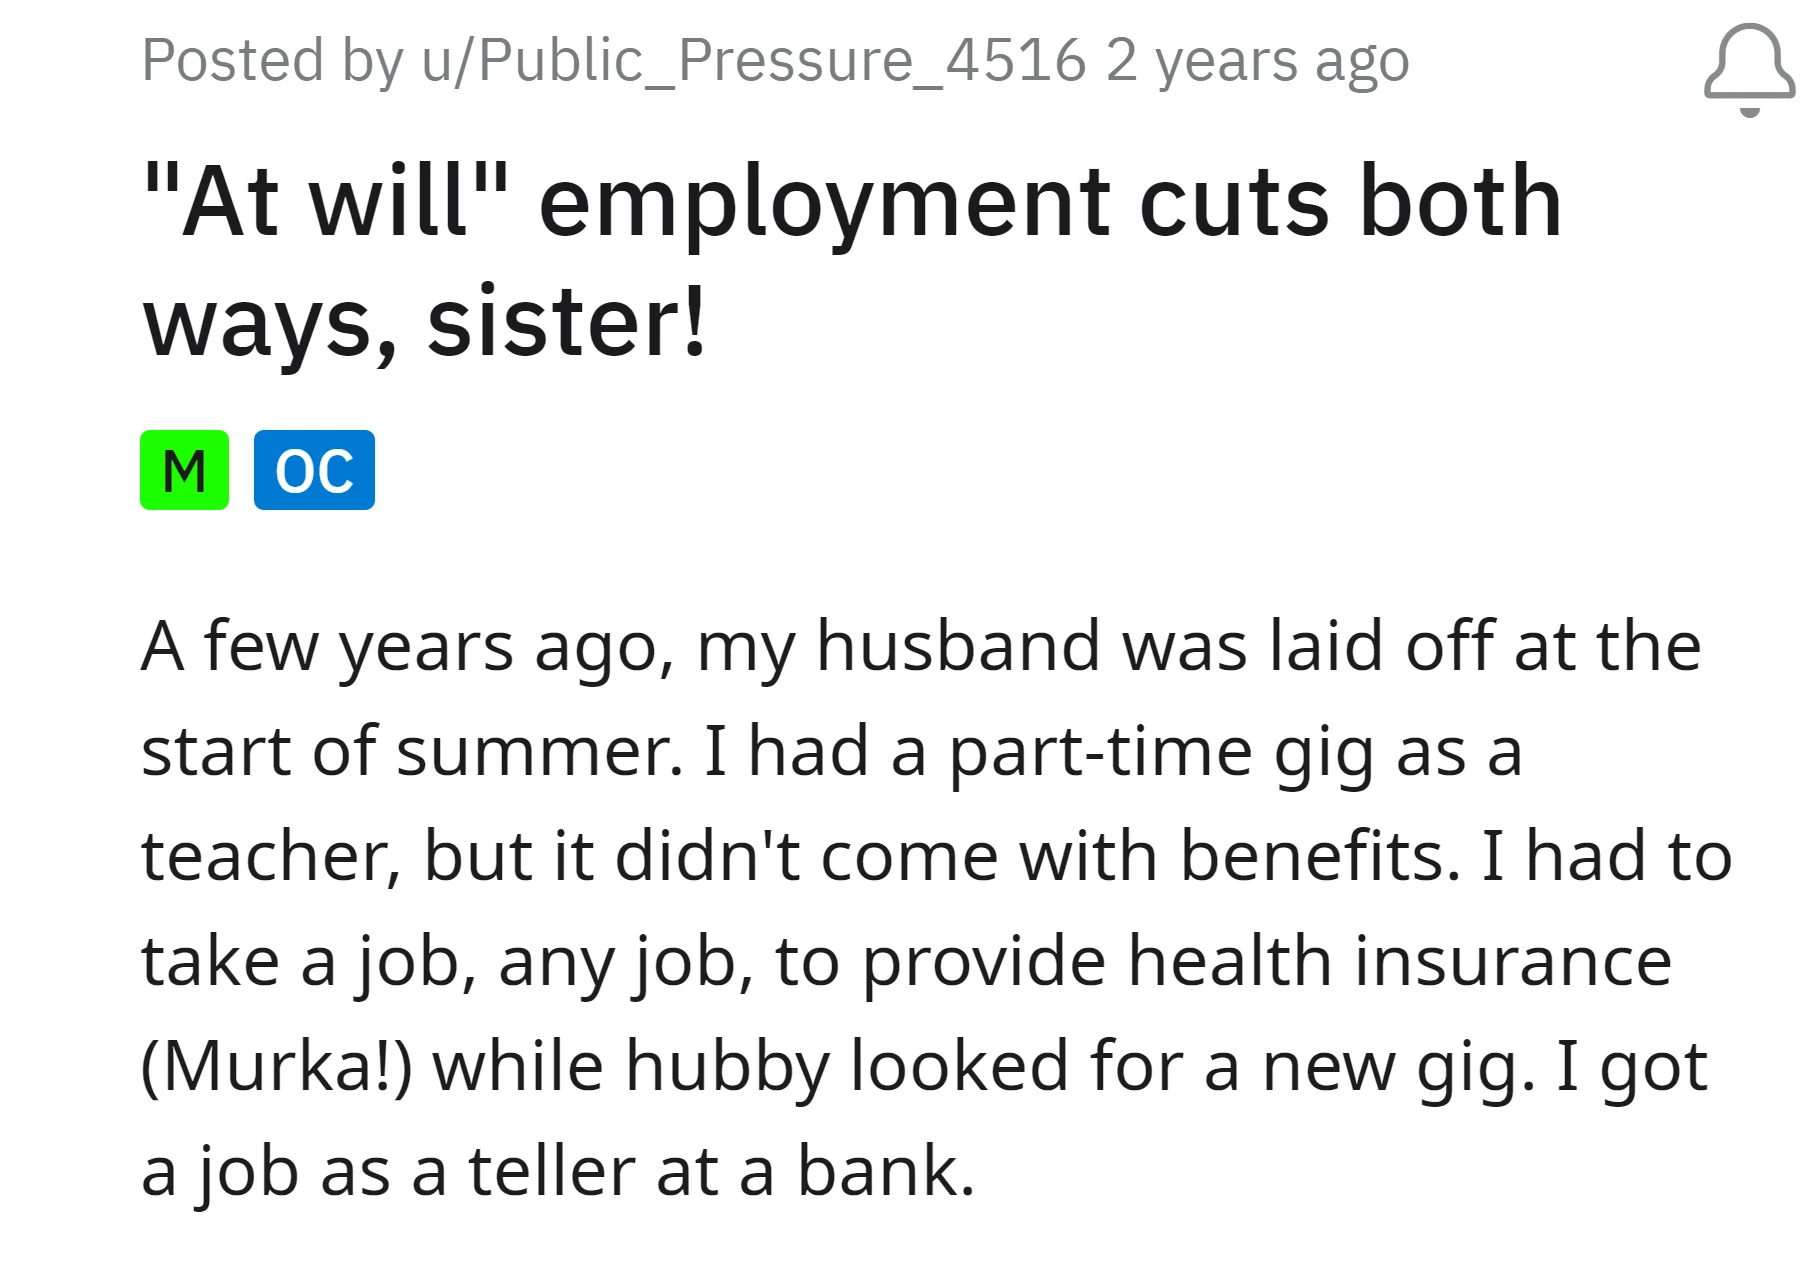 The OP took a job as a bank teller without benefits to secure health insurance during her husband's layoff